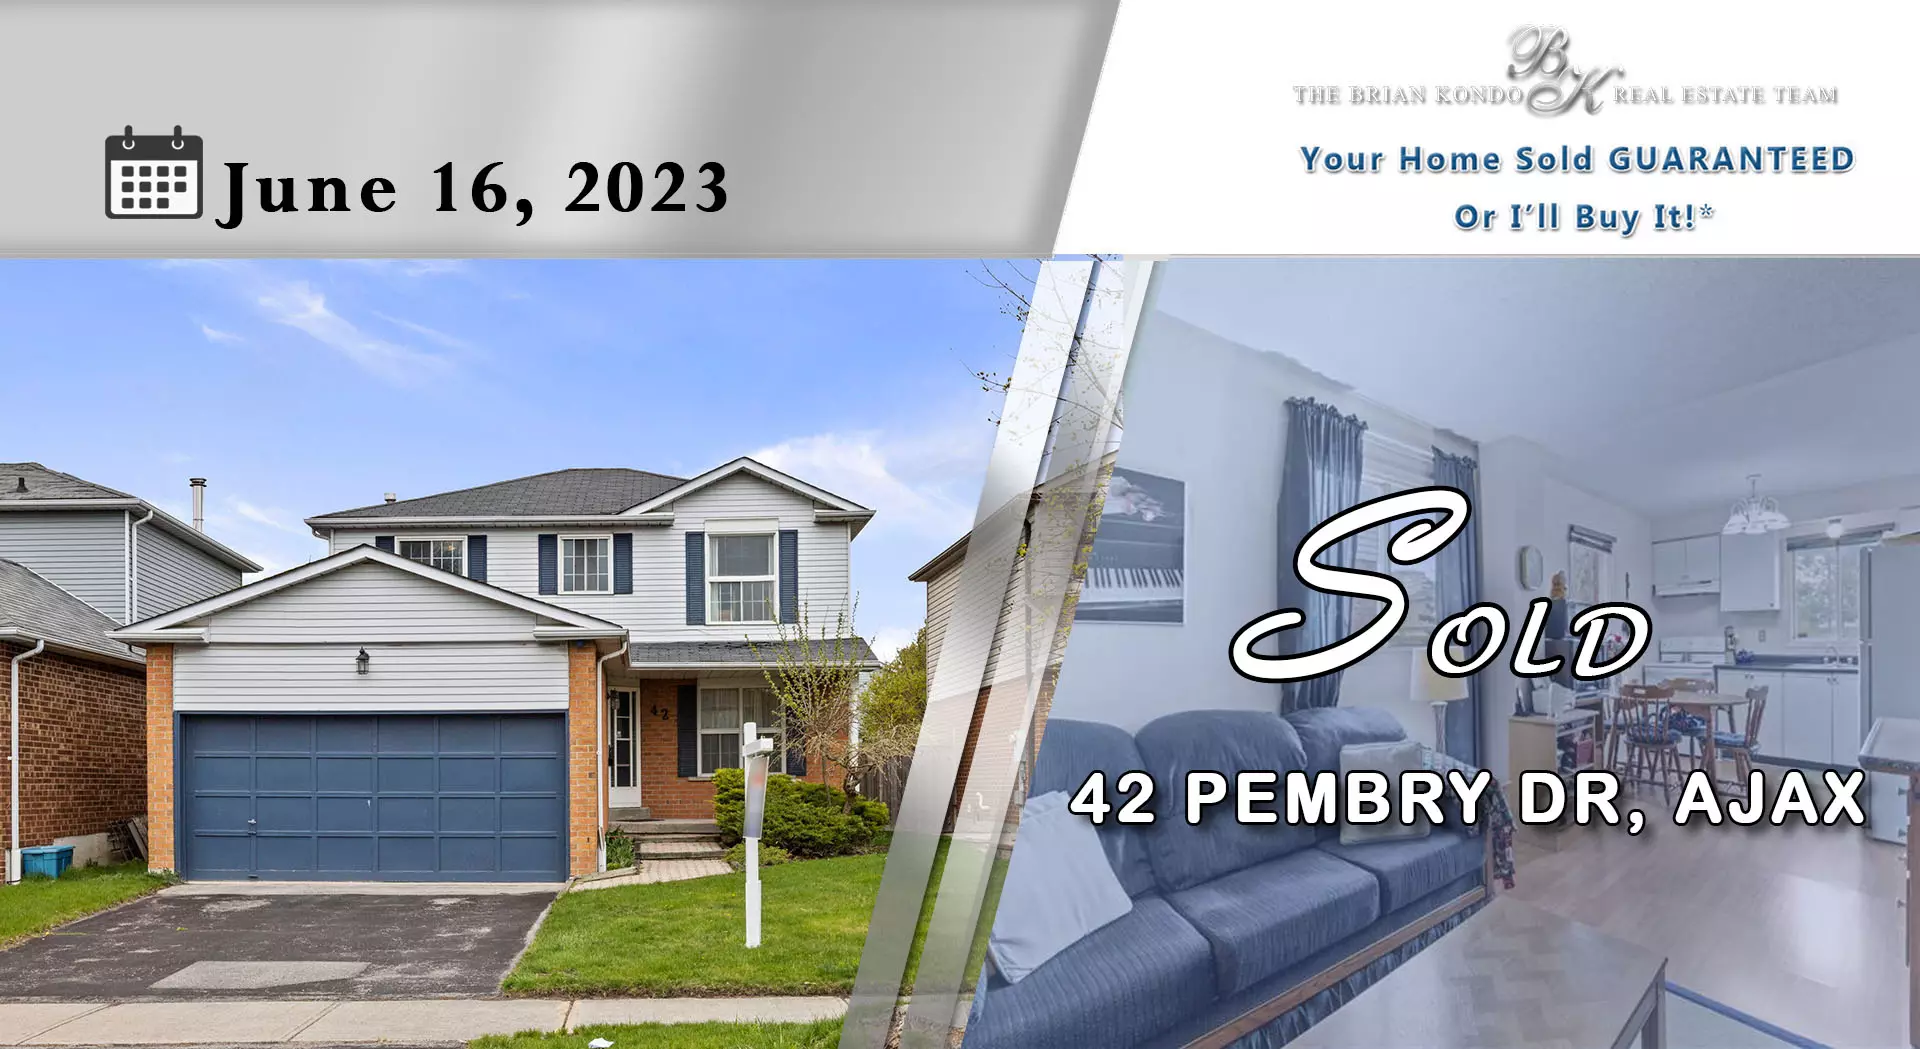 Recently Sold Property - 42 Pembry Dr, Ajax